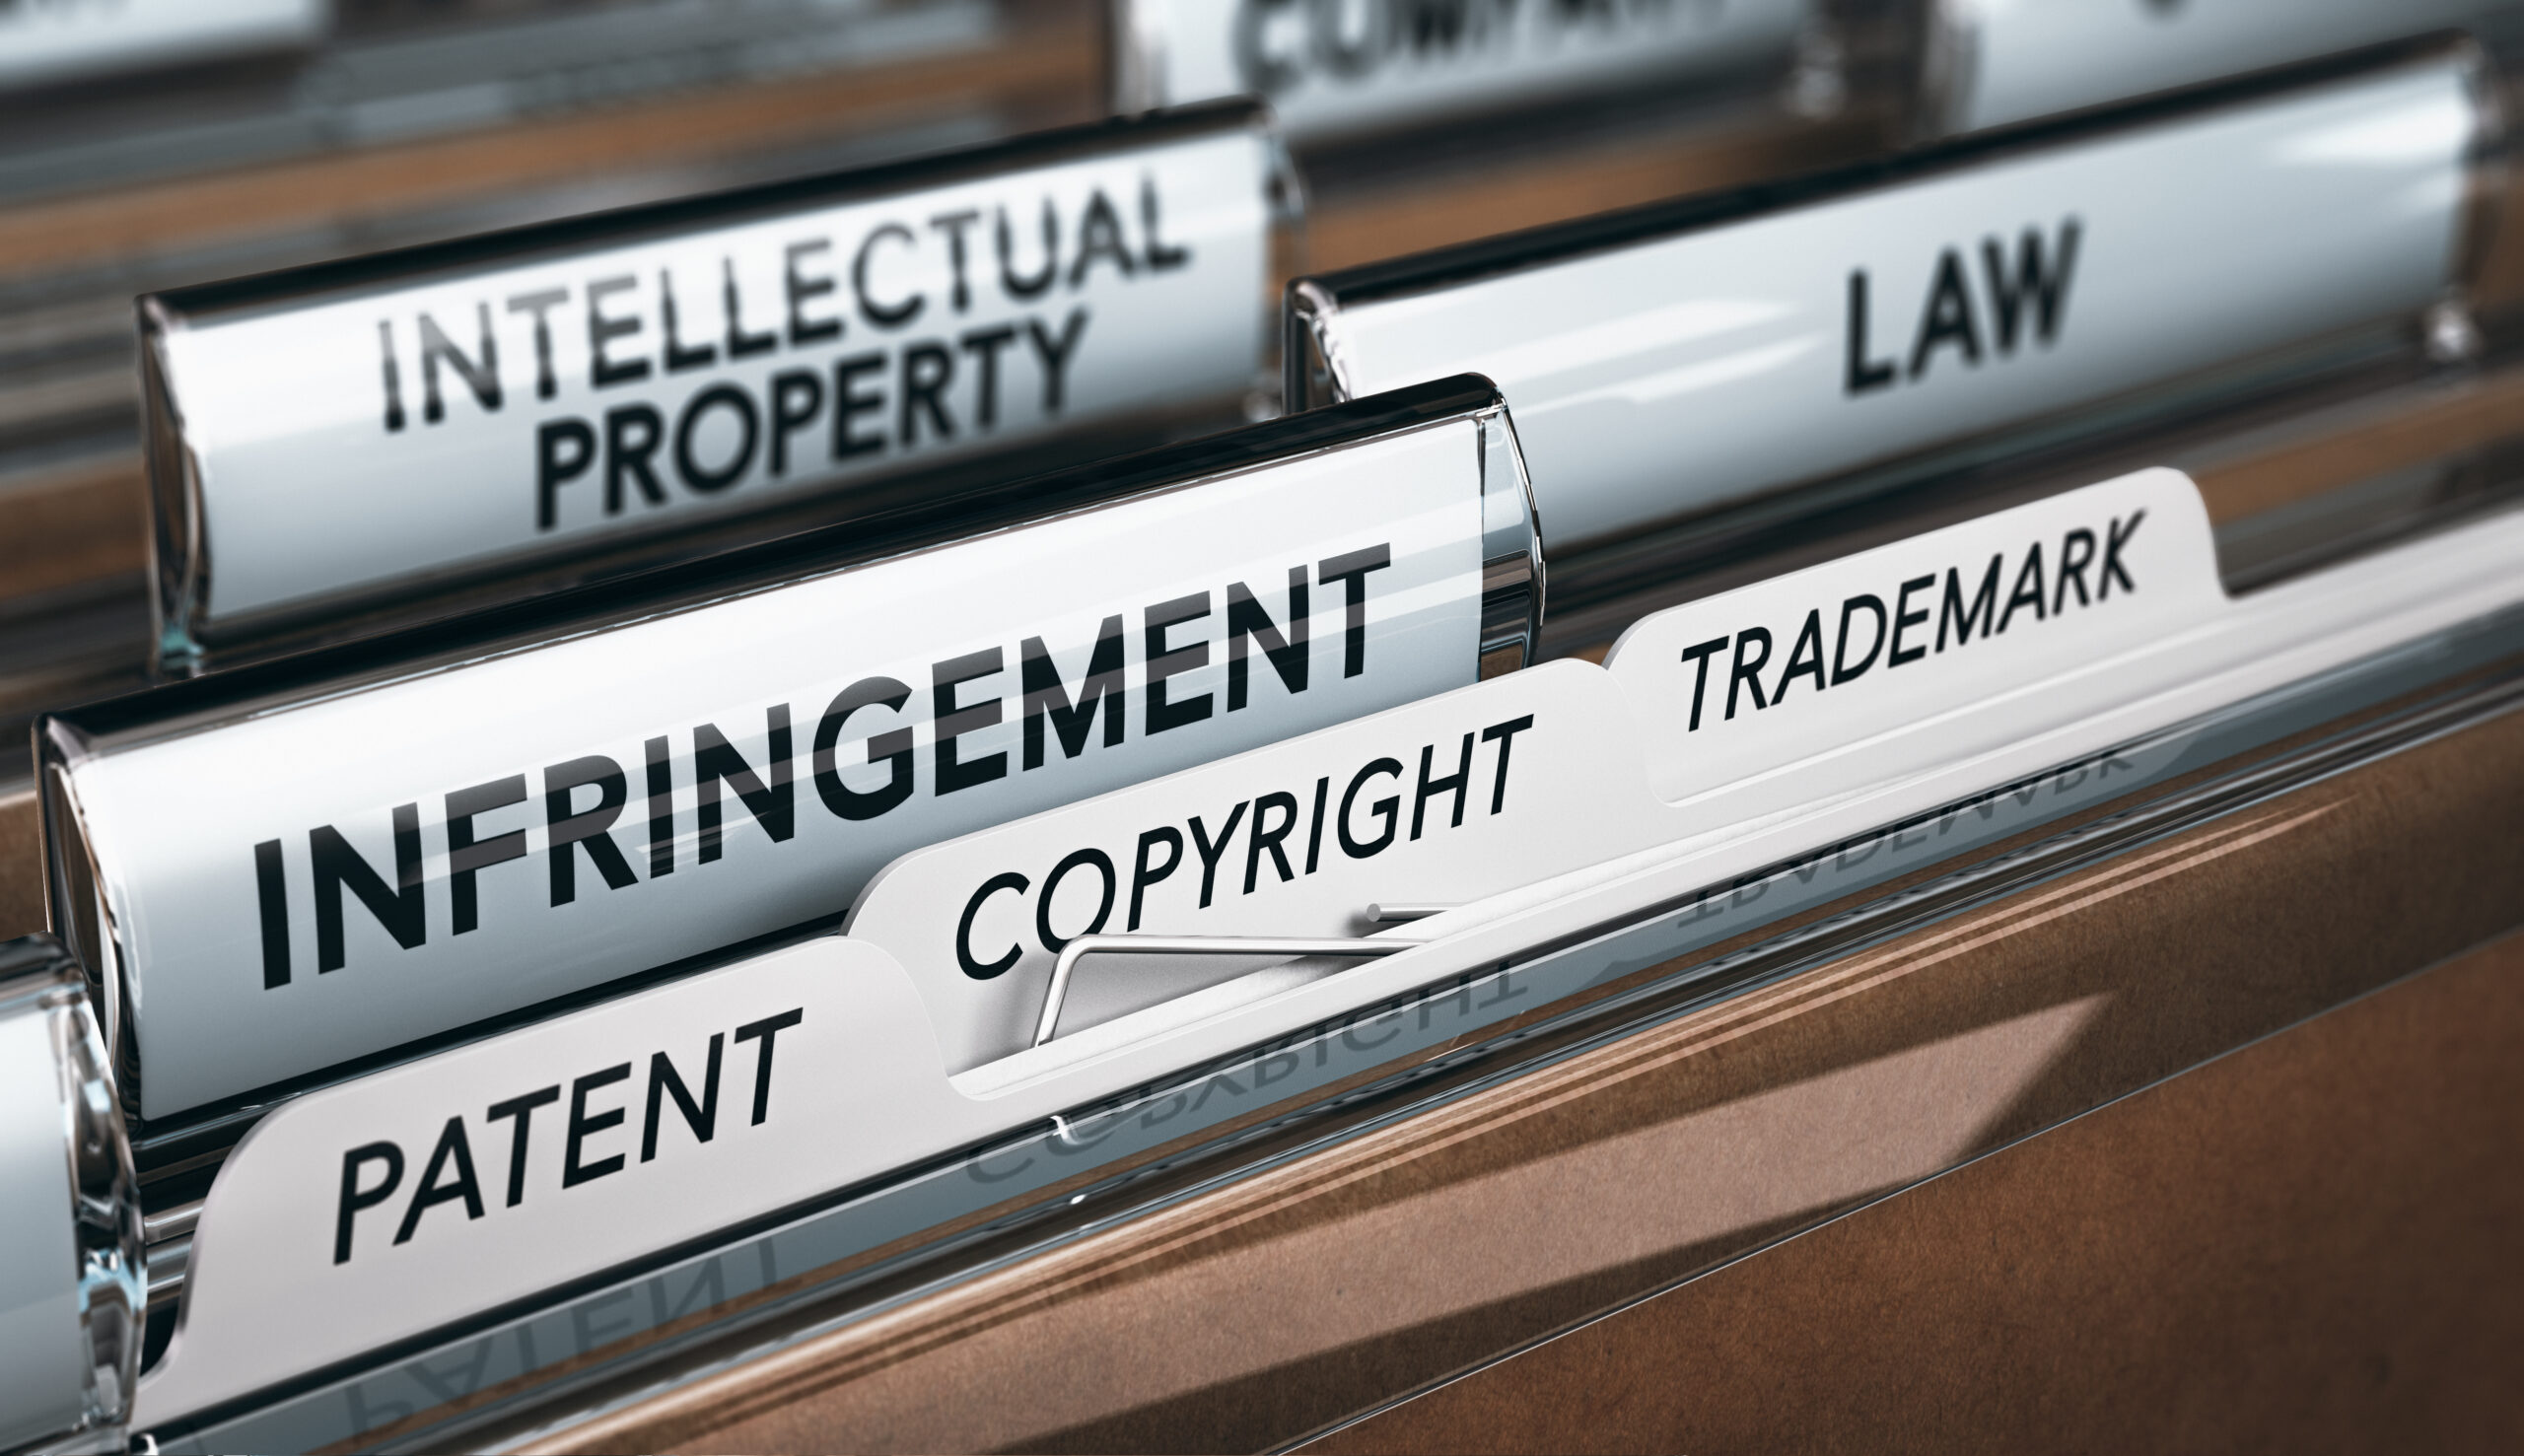 Are Your Copyrights, Patents, Designs Covered?